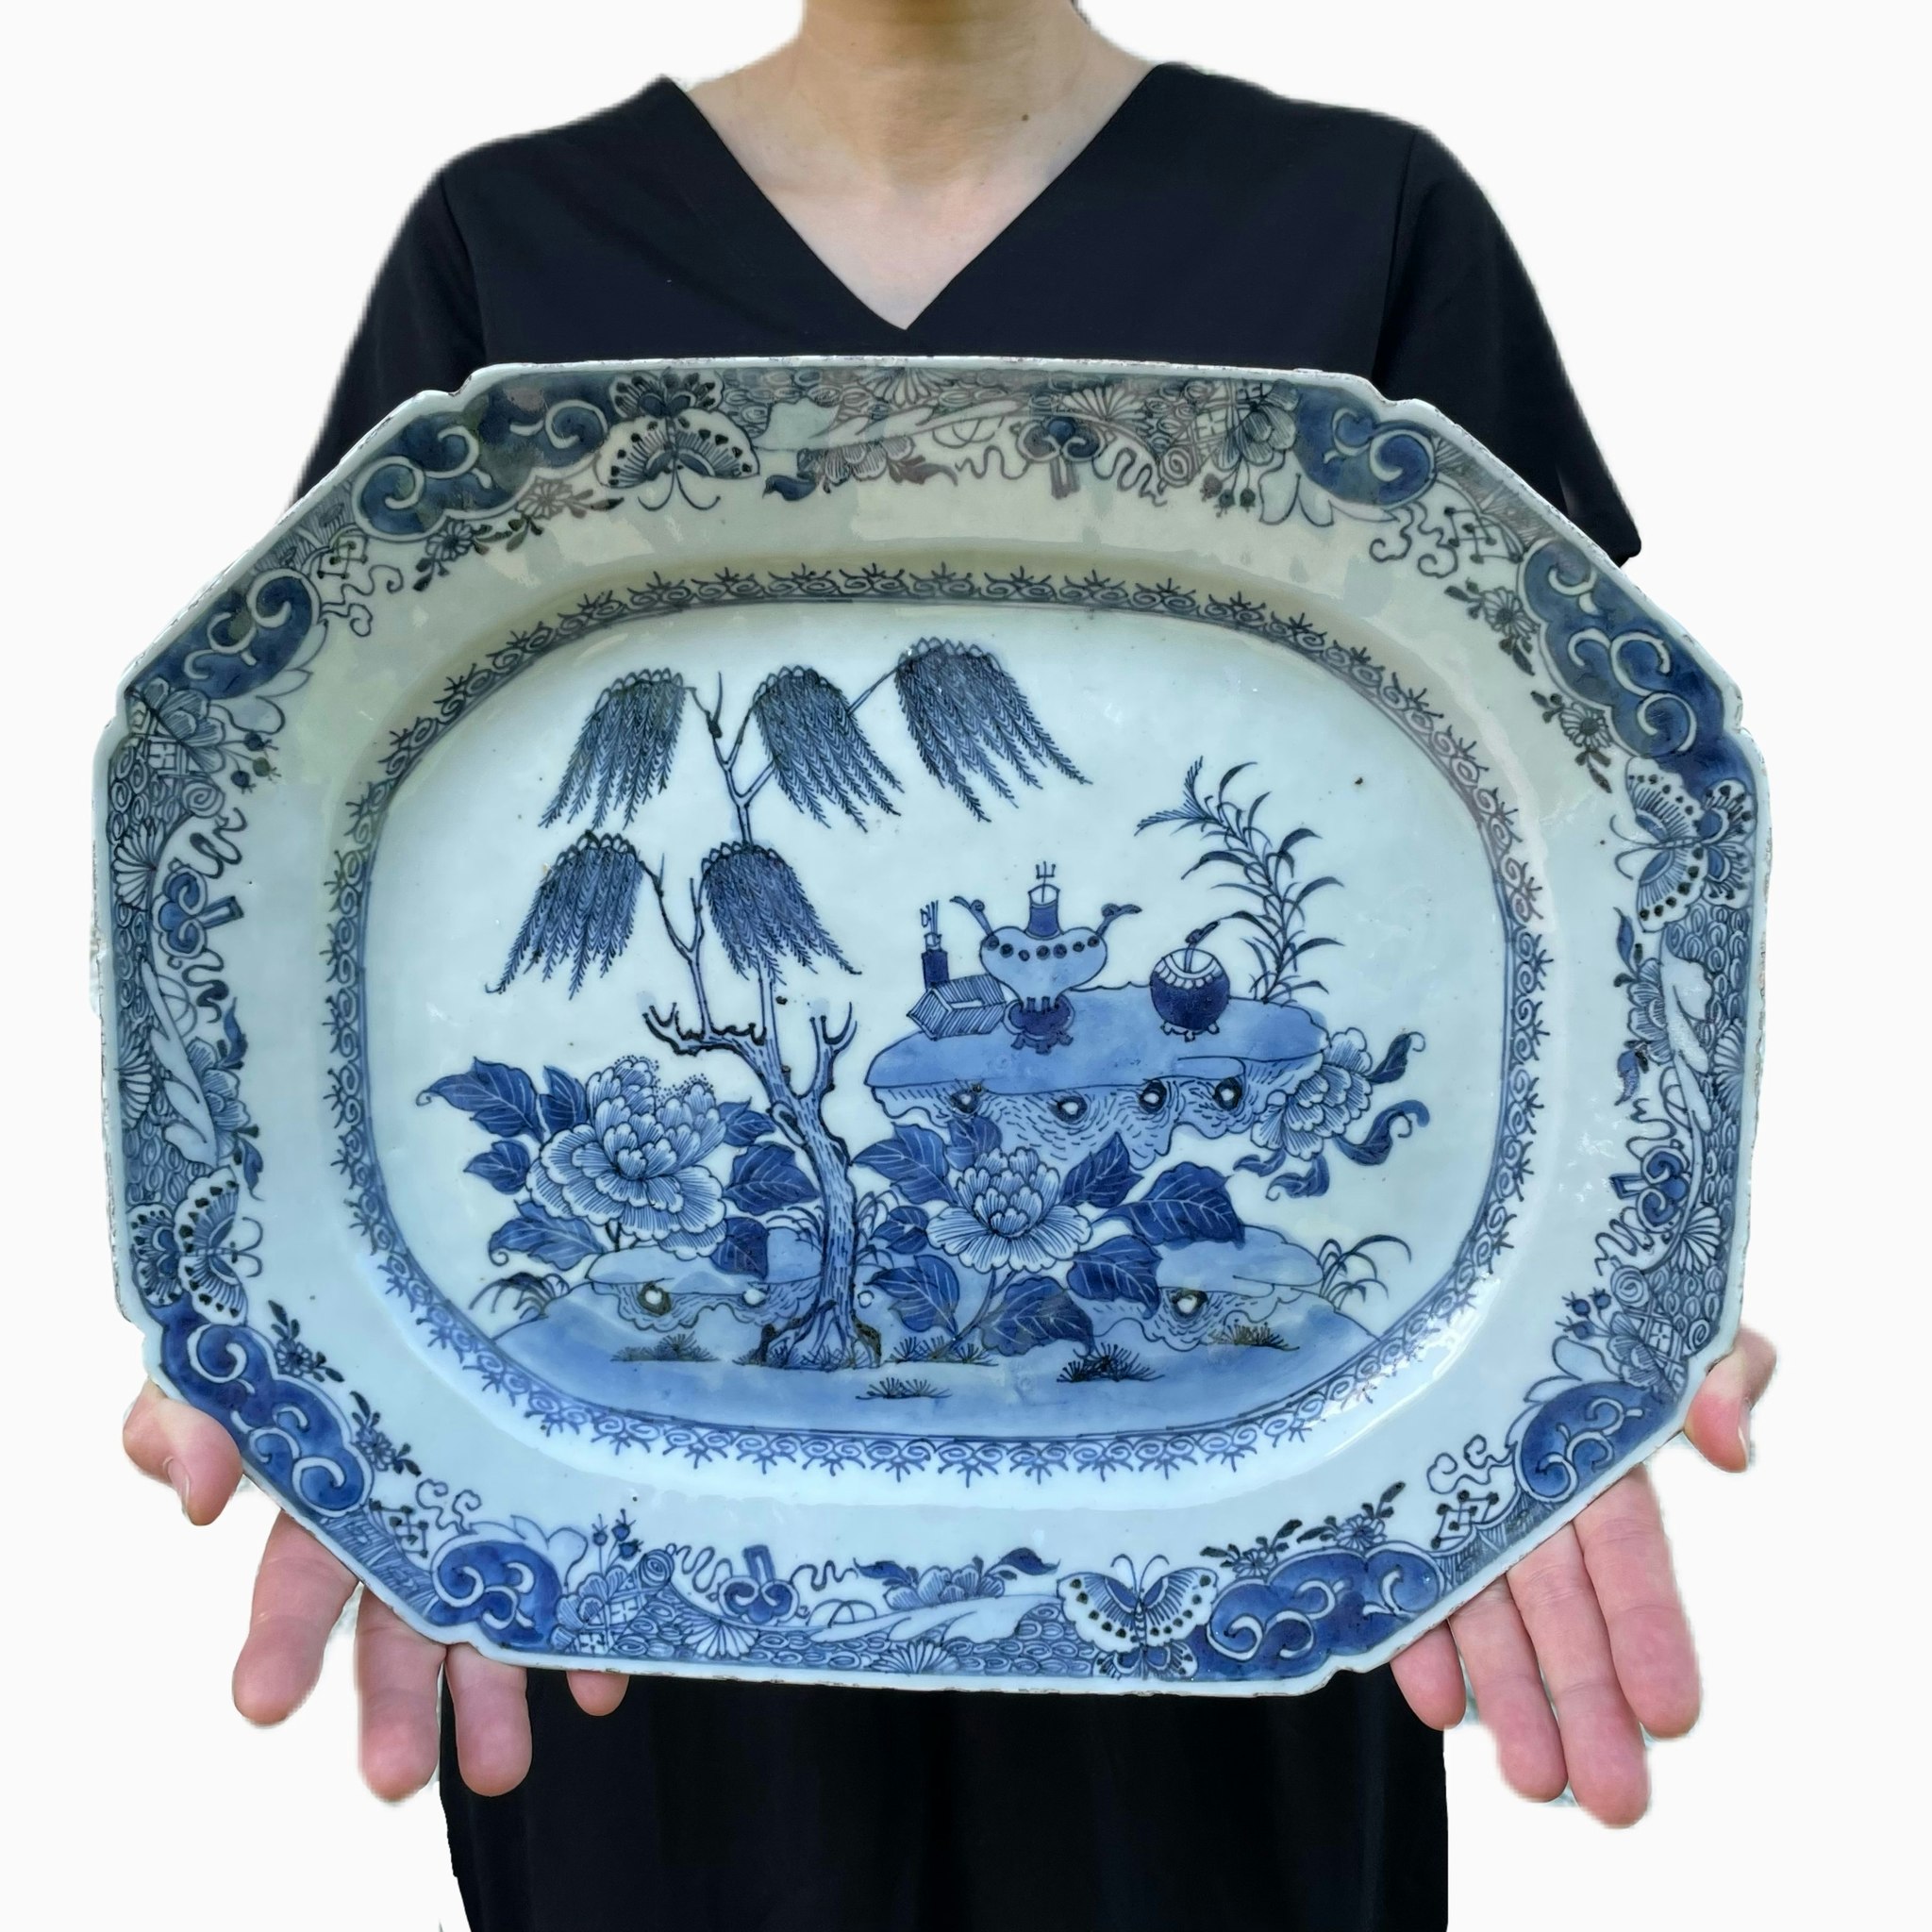 Antique Chinese platter in blue and white, Qianlong period #1469